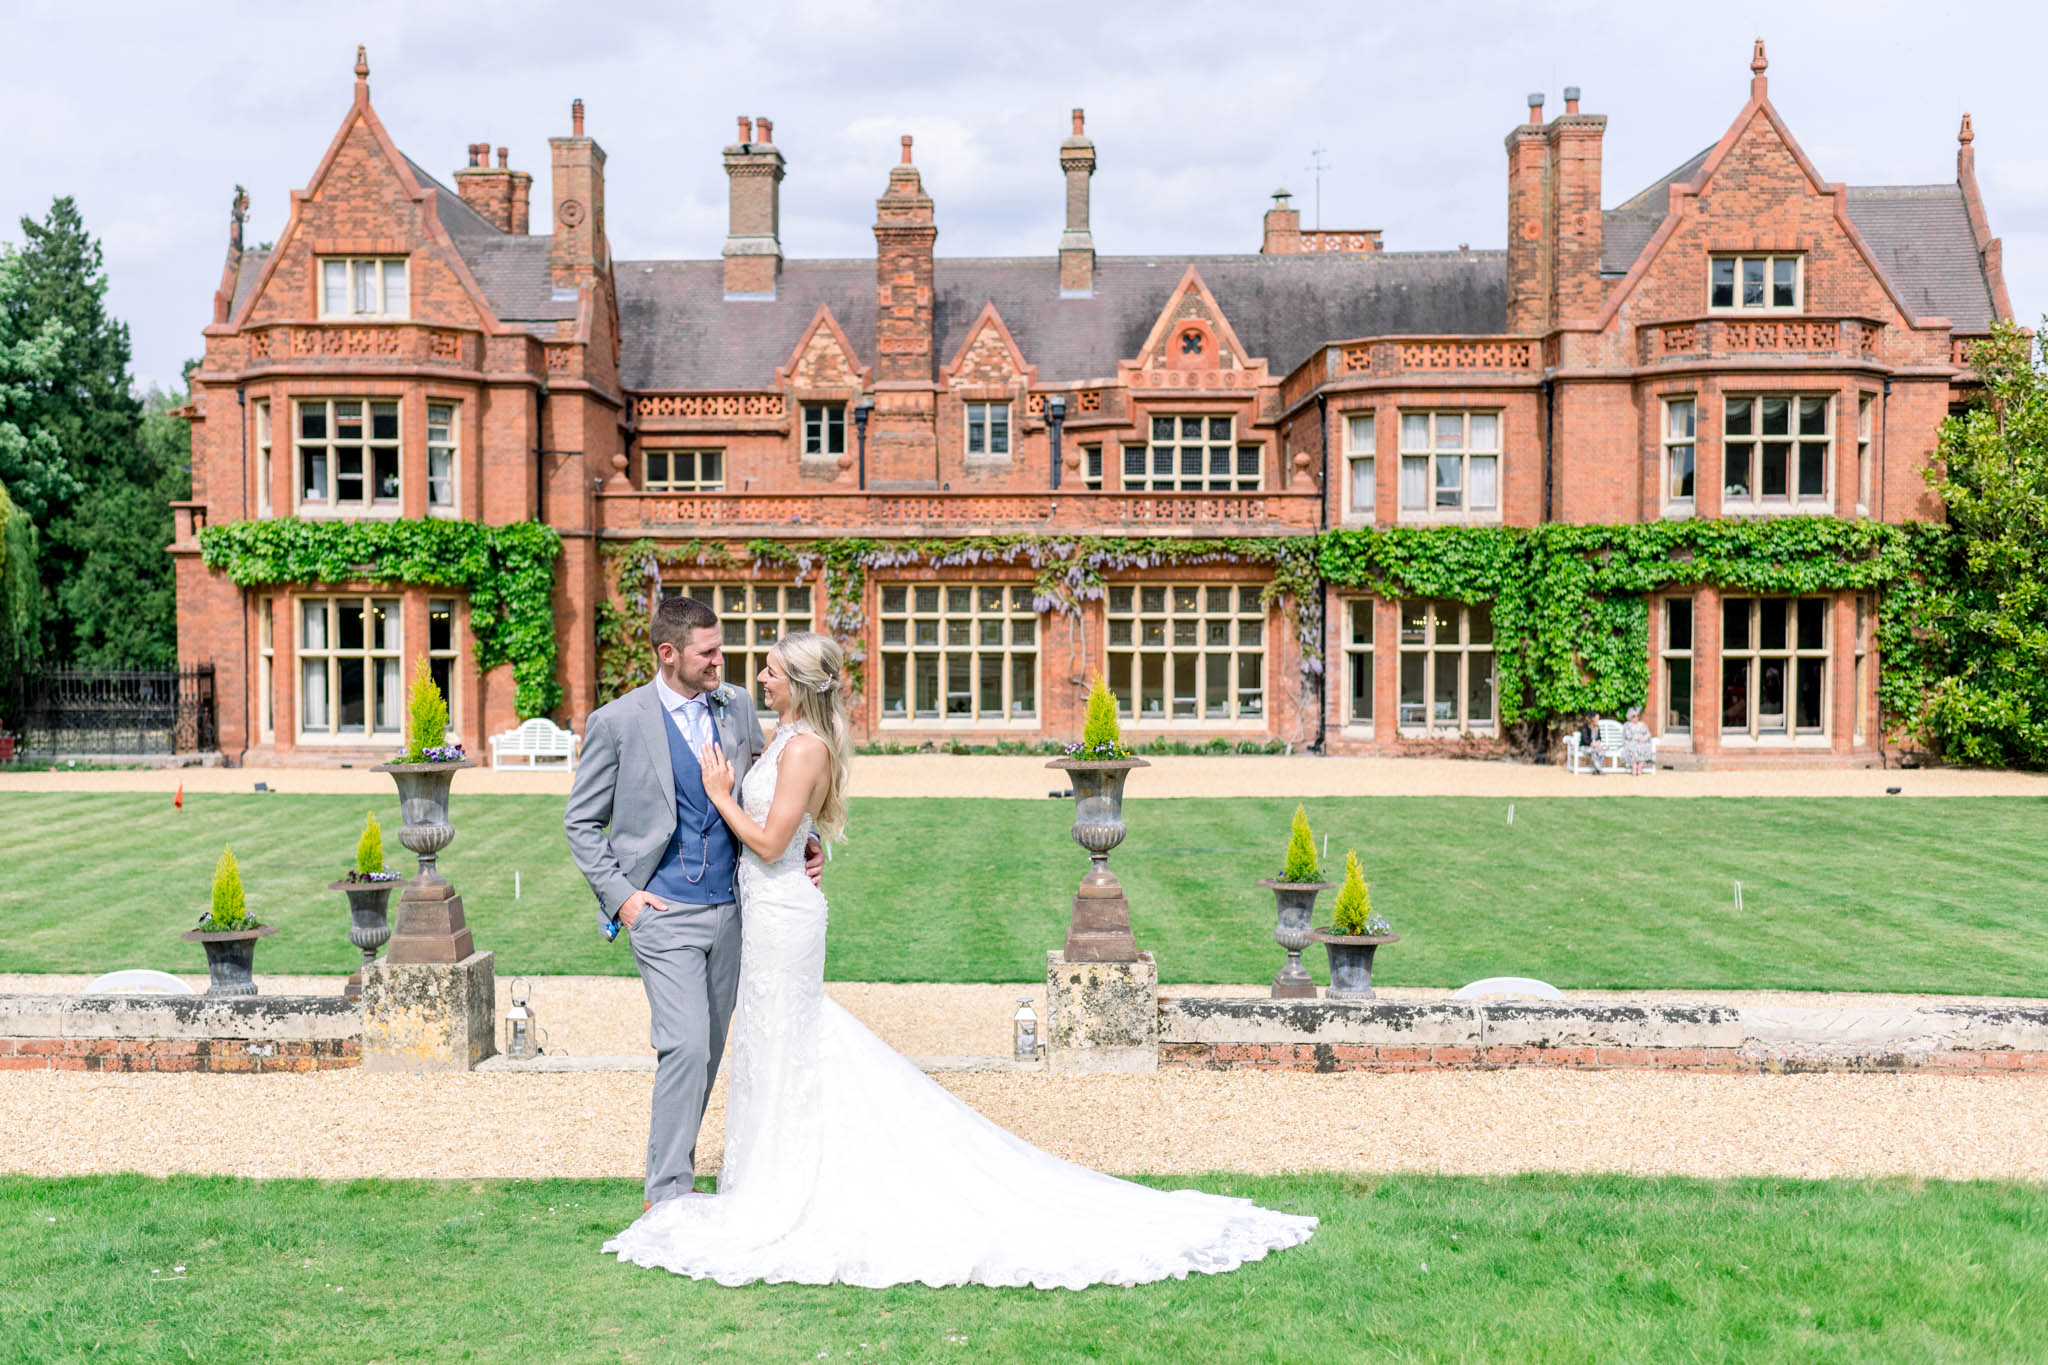 https://usercontent.one/wp/www.natalieandmax.co.uk/wp-content/uploads/2022/05/NG-Holmewood-Hall-Wedding-Photography-by-Natalie-and-Max-Photo-and-Films-479.jpg?media=1711985334